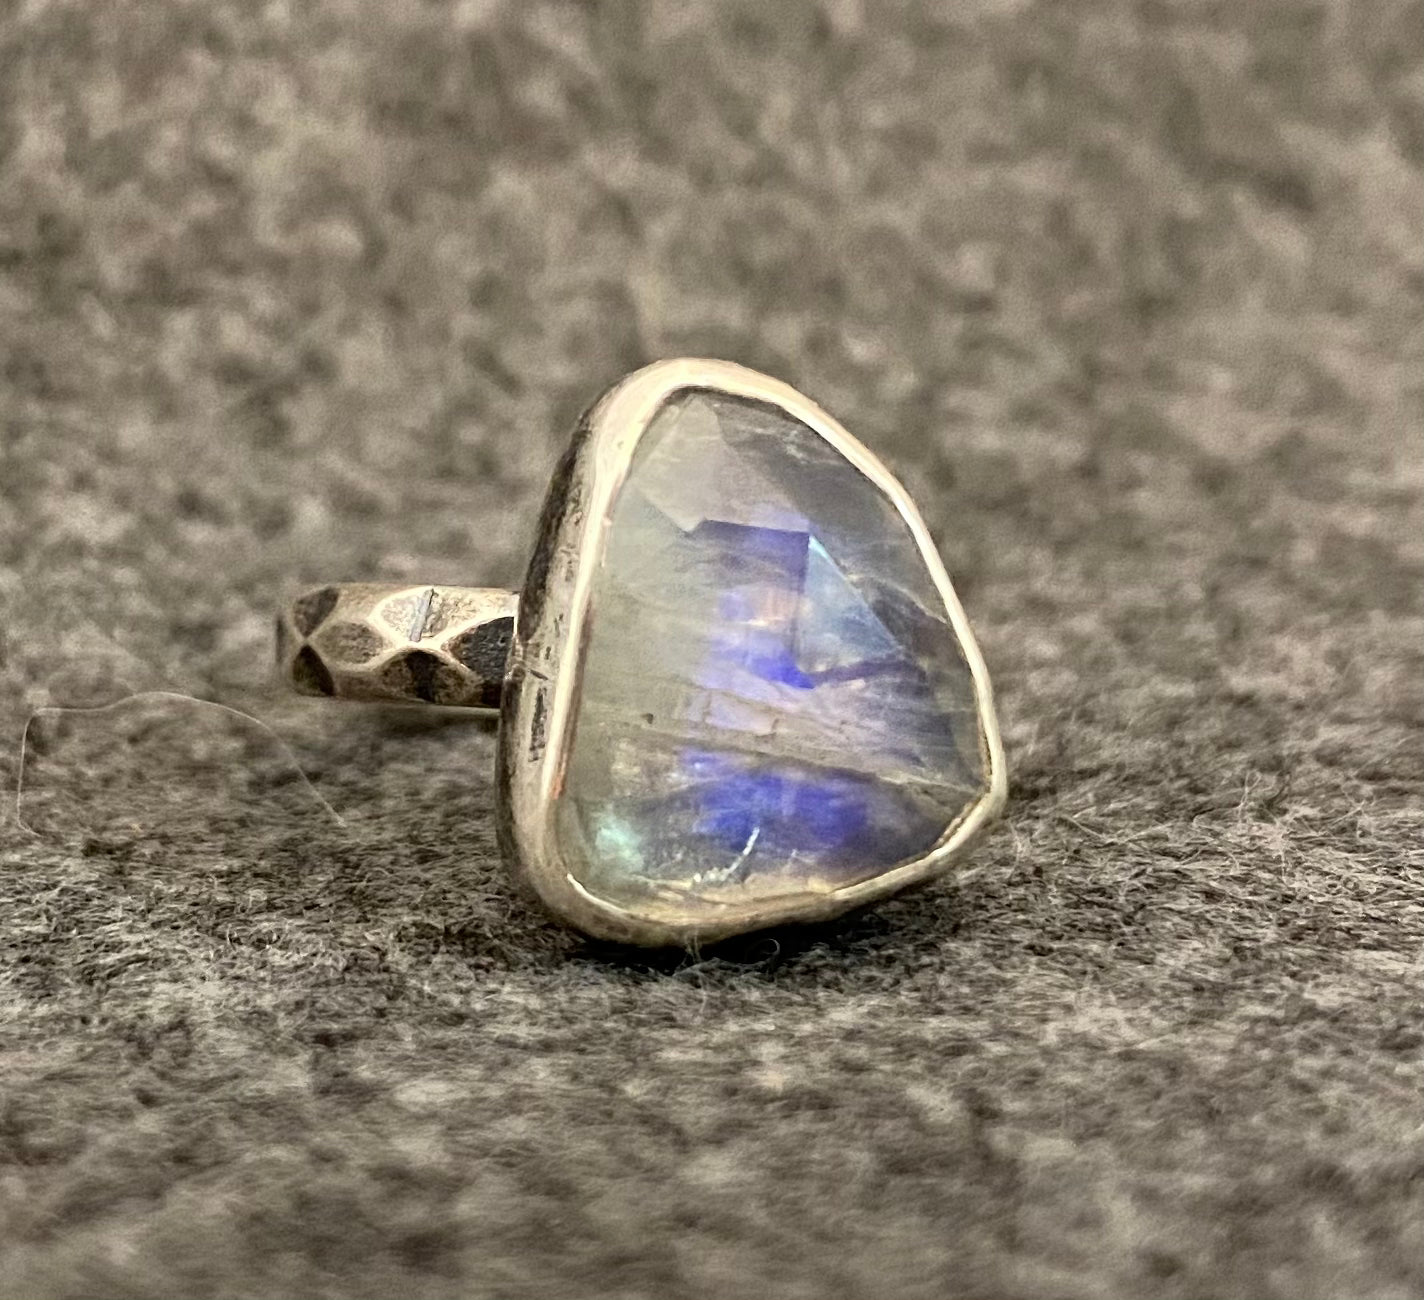 Gemstone Statement Ring with Sterling Silver and Rainbow Moonstone